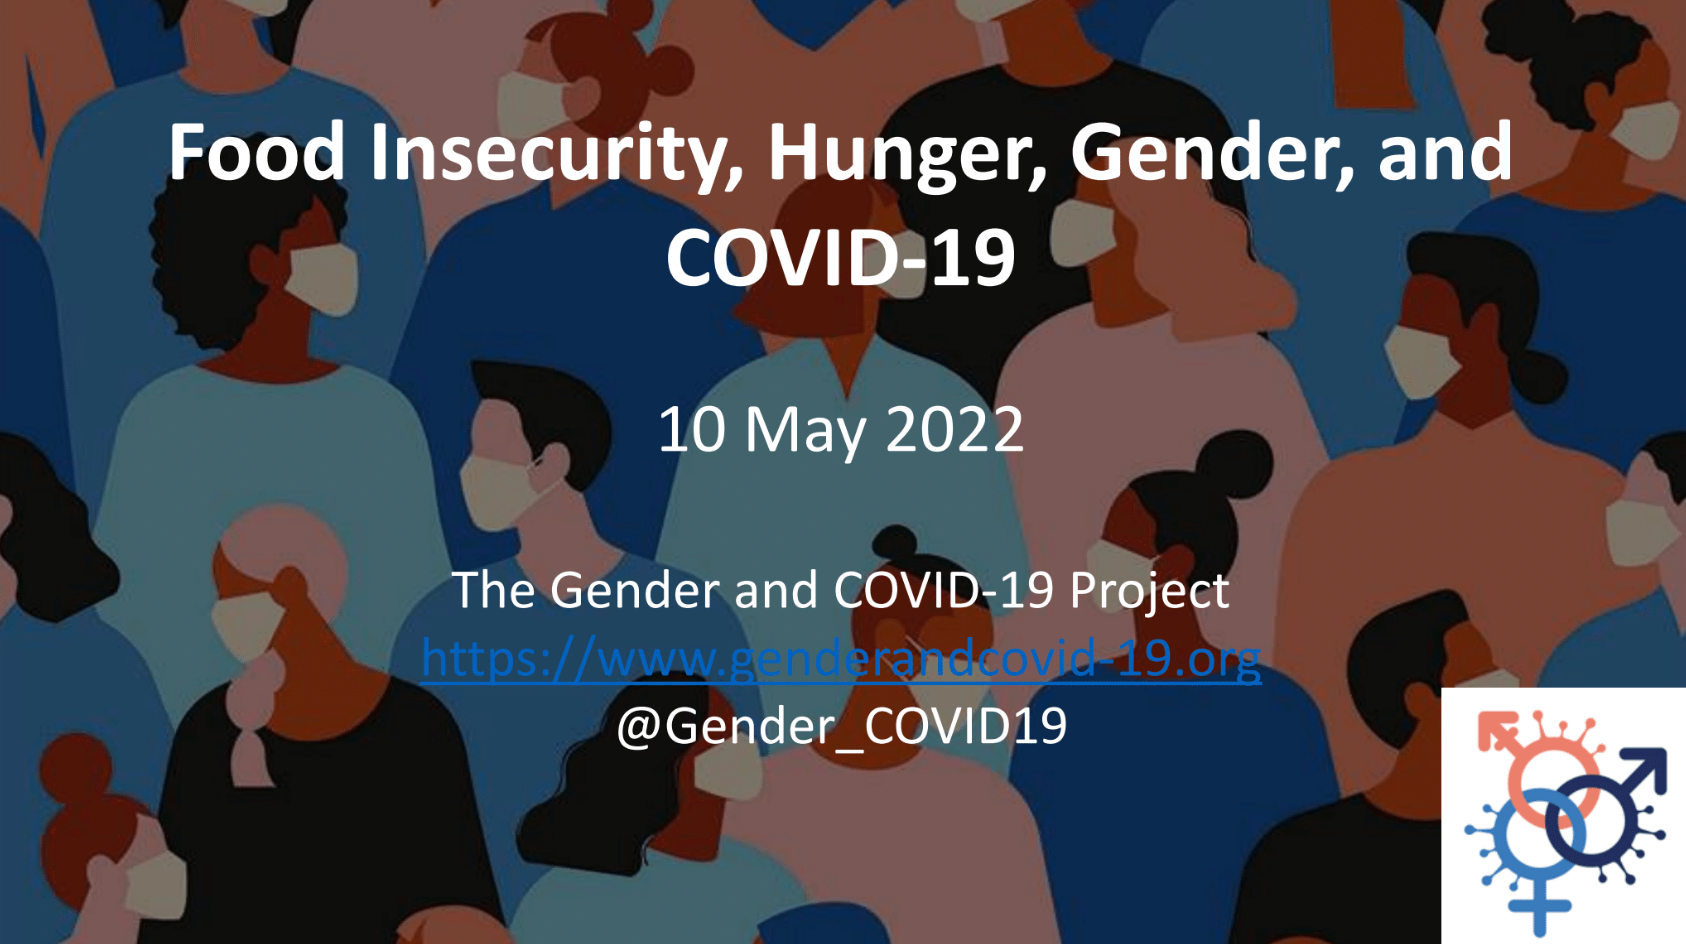 Food insecurity, hunger, gender and COVID 19